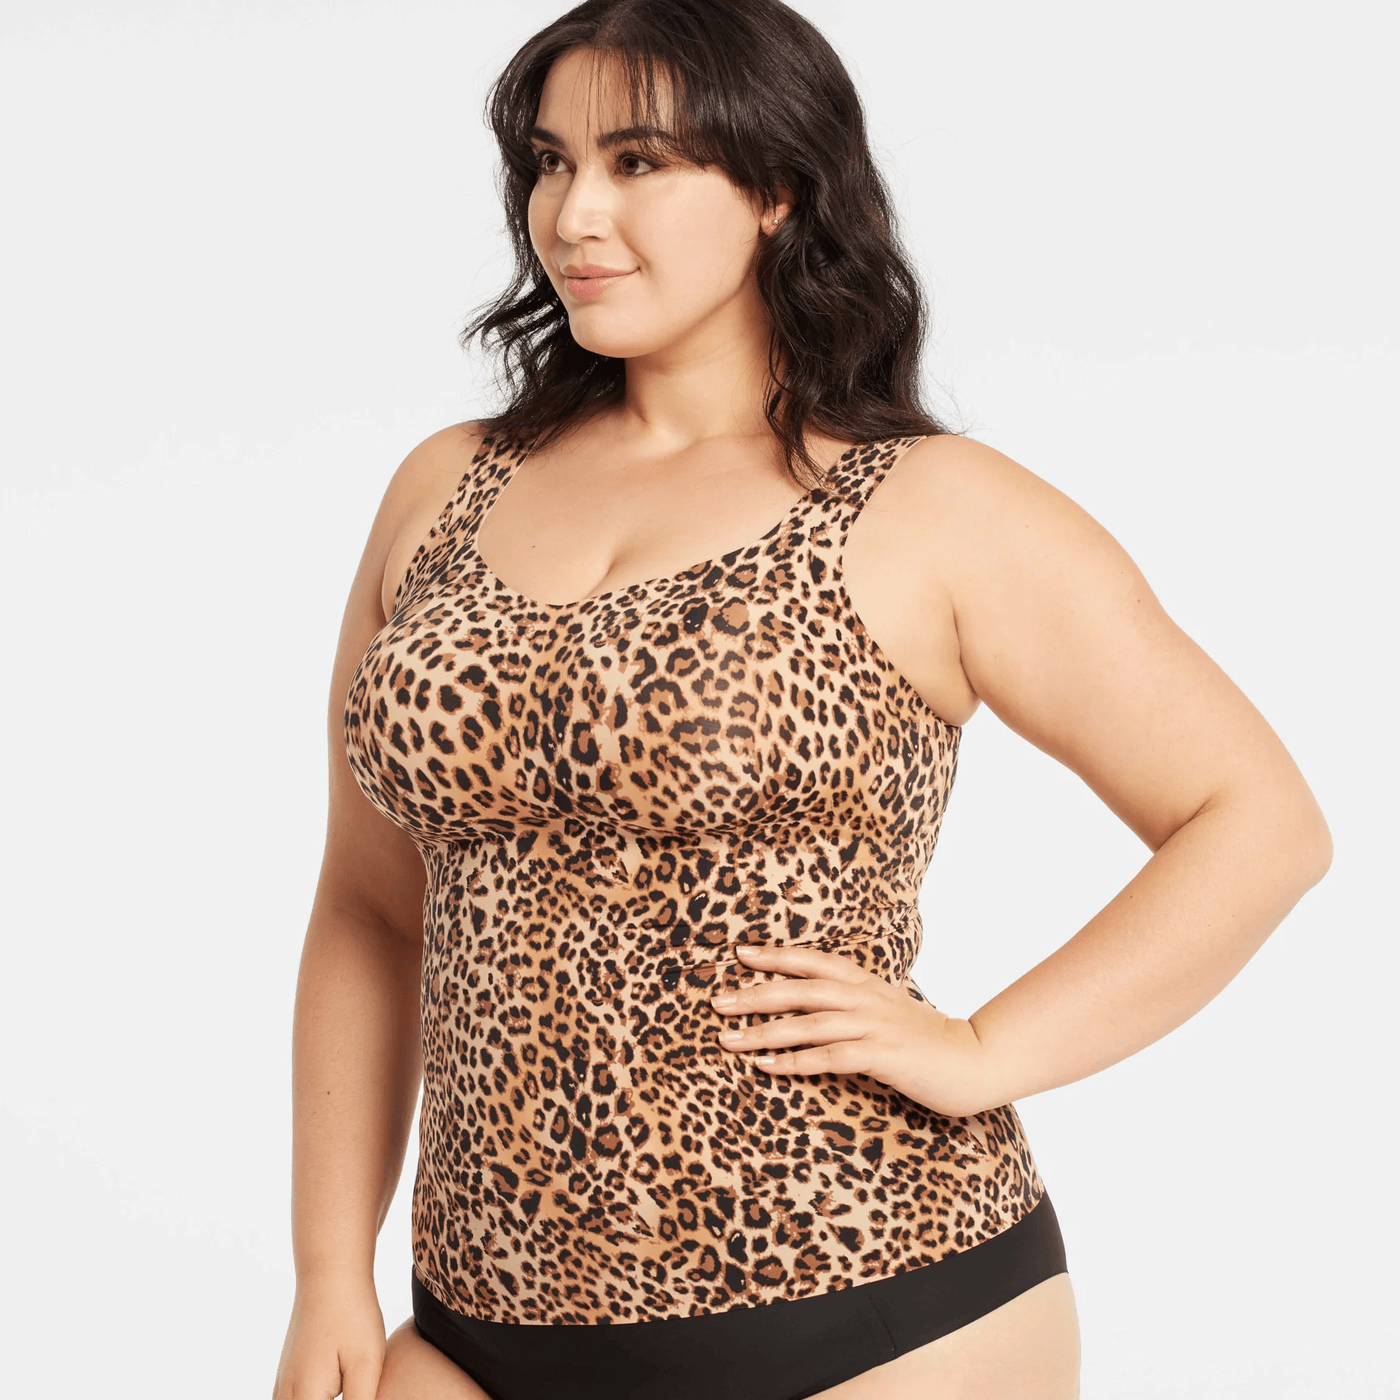 Smoothing Bra Cami - Leopard - Blue Sky Fashions & Lingerie